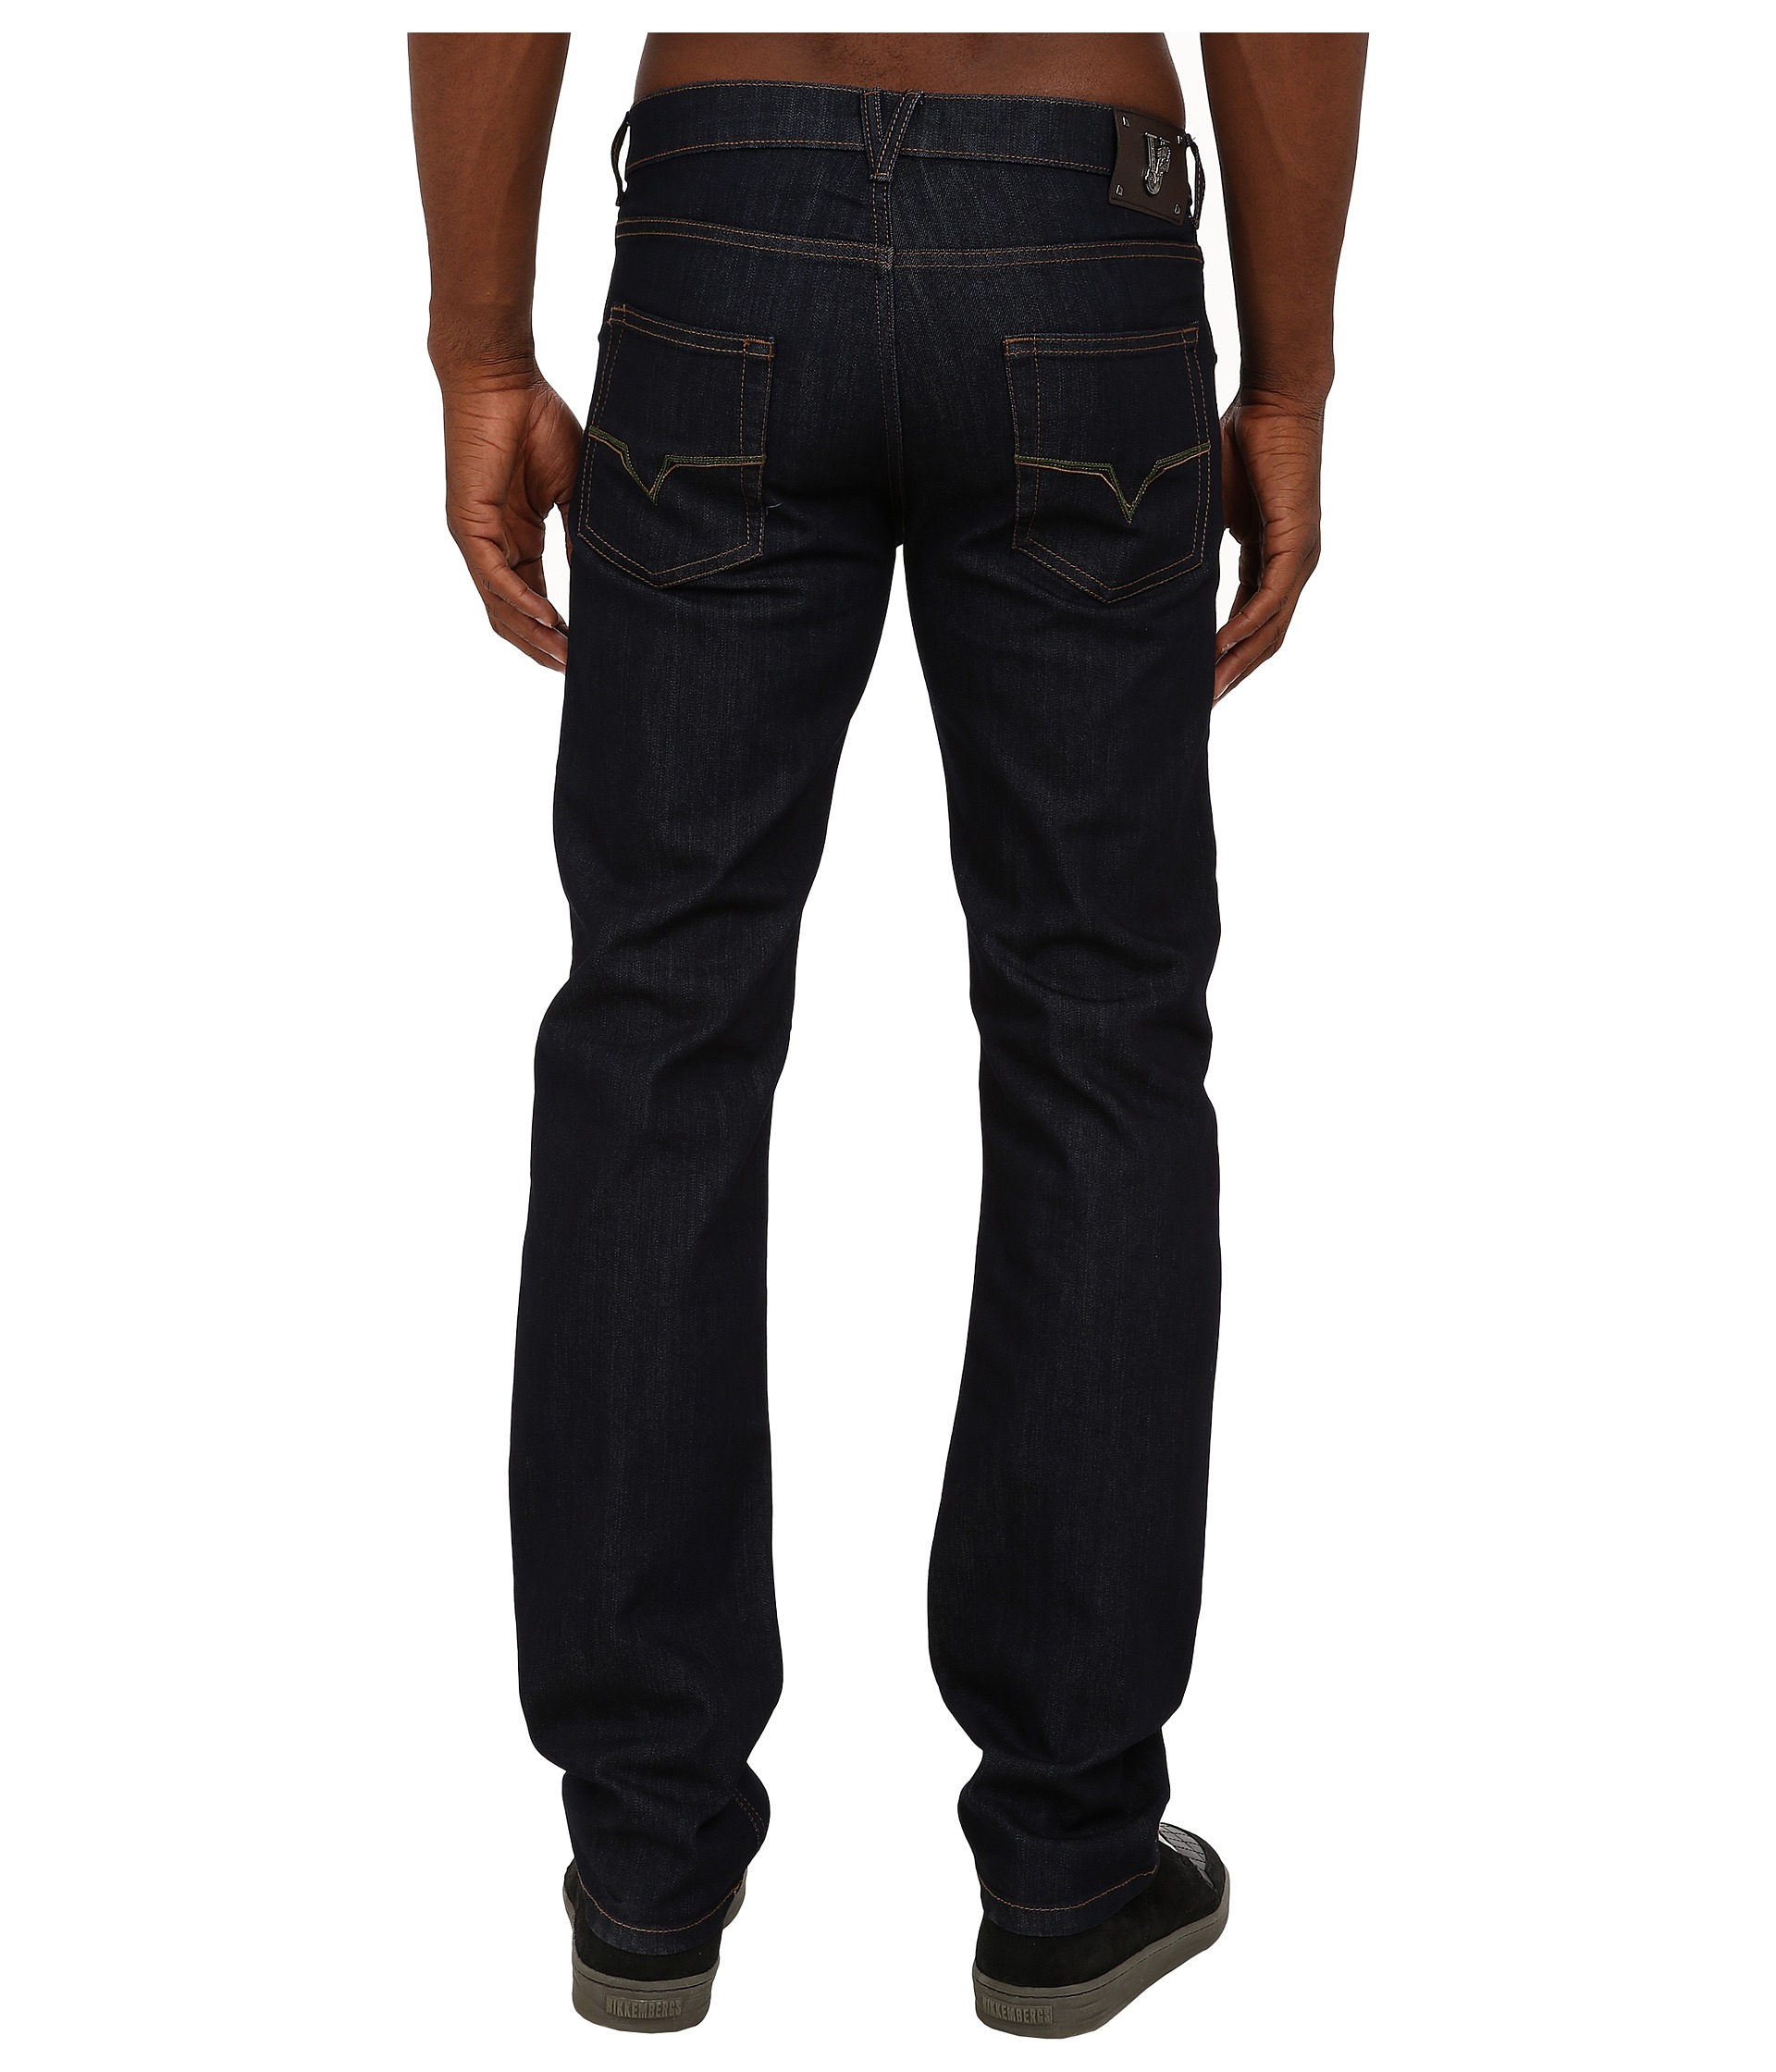 Versace Jeans Ink Denim, Clothing | Shipped Free at Zappos